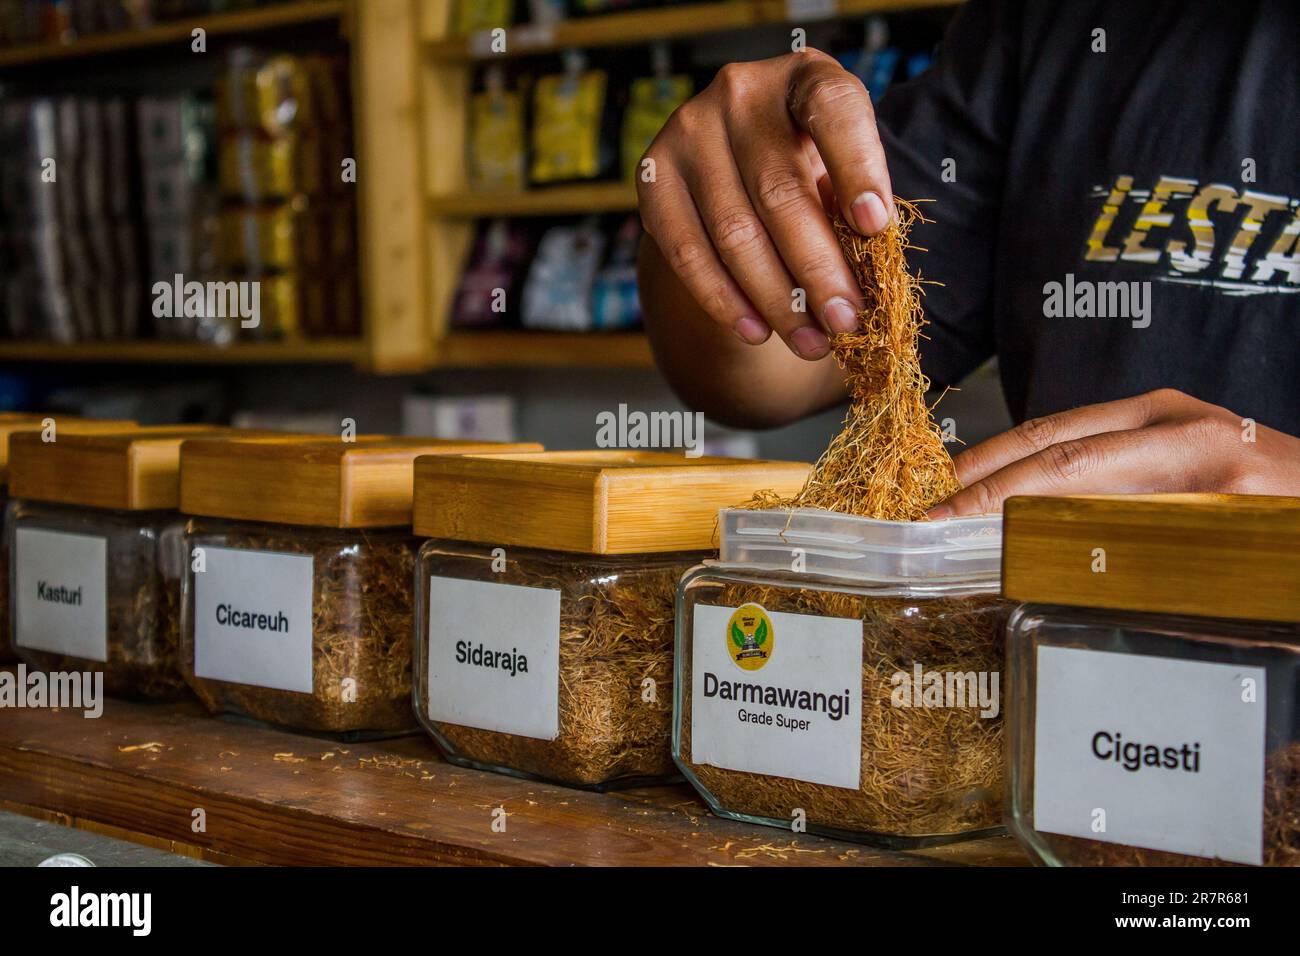 https://c8.alamy.com/comp/2R7R681/june-17-2023-sumedang-west-java-indonesia-a-man-arranges-various-types-of-local-tobacco-on-june-17-2023-at-tobacco-wholesale-market-in-tanjungsari-sumedang-regency-indonesia-draft-health-bill-ruu-being-discussed-by-the-government-has-become-a-polemic-because-it-is-considered-to-threaten-tobacco-farmers-draft-law-on-health-contains-several-regulations-one-of-which-is-the-issue-of-equalizing-tobacco-and-tobacco-products-with-narcotics-psychotropic-substances-and-alcohol-according-to-data-from-the-central-statistics-agency-bps-indonesia-produced-2257-thousand-tons-of-tobacco-2R7R681.jpg